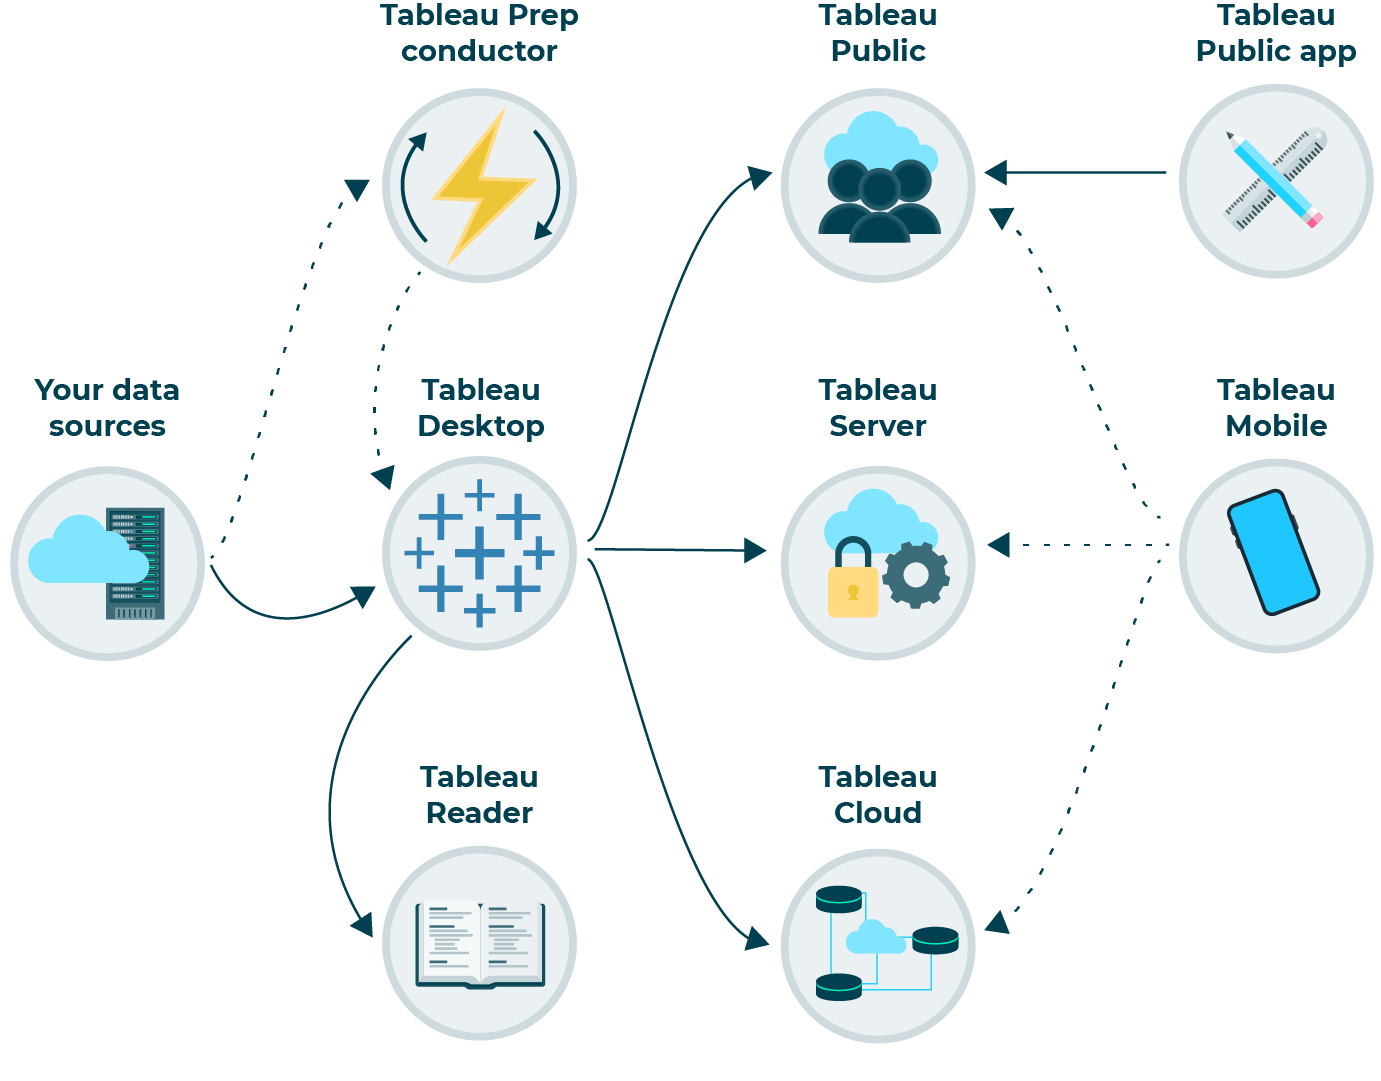 A diagram of the tableau ecosystem showing icons of Tableau products and their interconnections: Tableau Prep conductor, Tableau Desktop, Tableau Reader, Tableau Public app, Tableau Public, Tableau Server, Tableau Cloud, Tableau Mobile